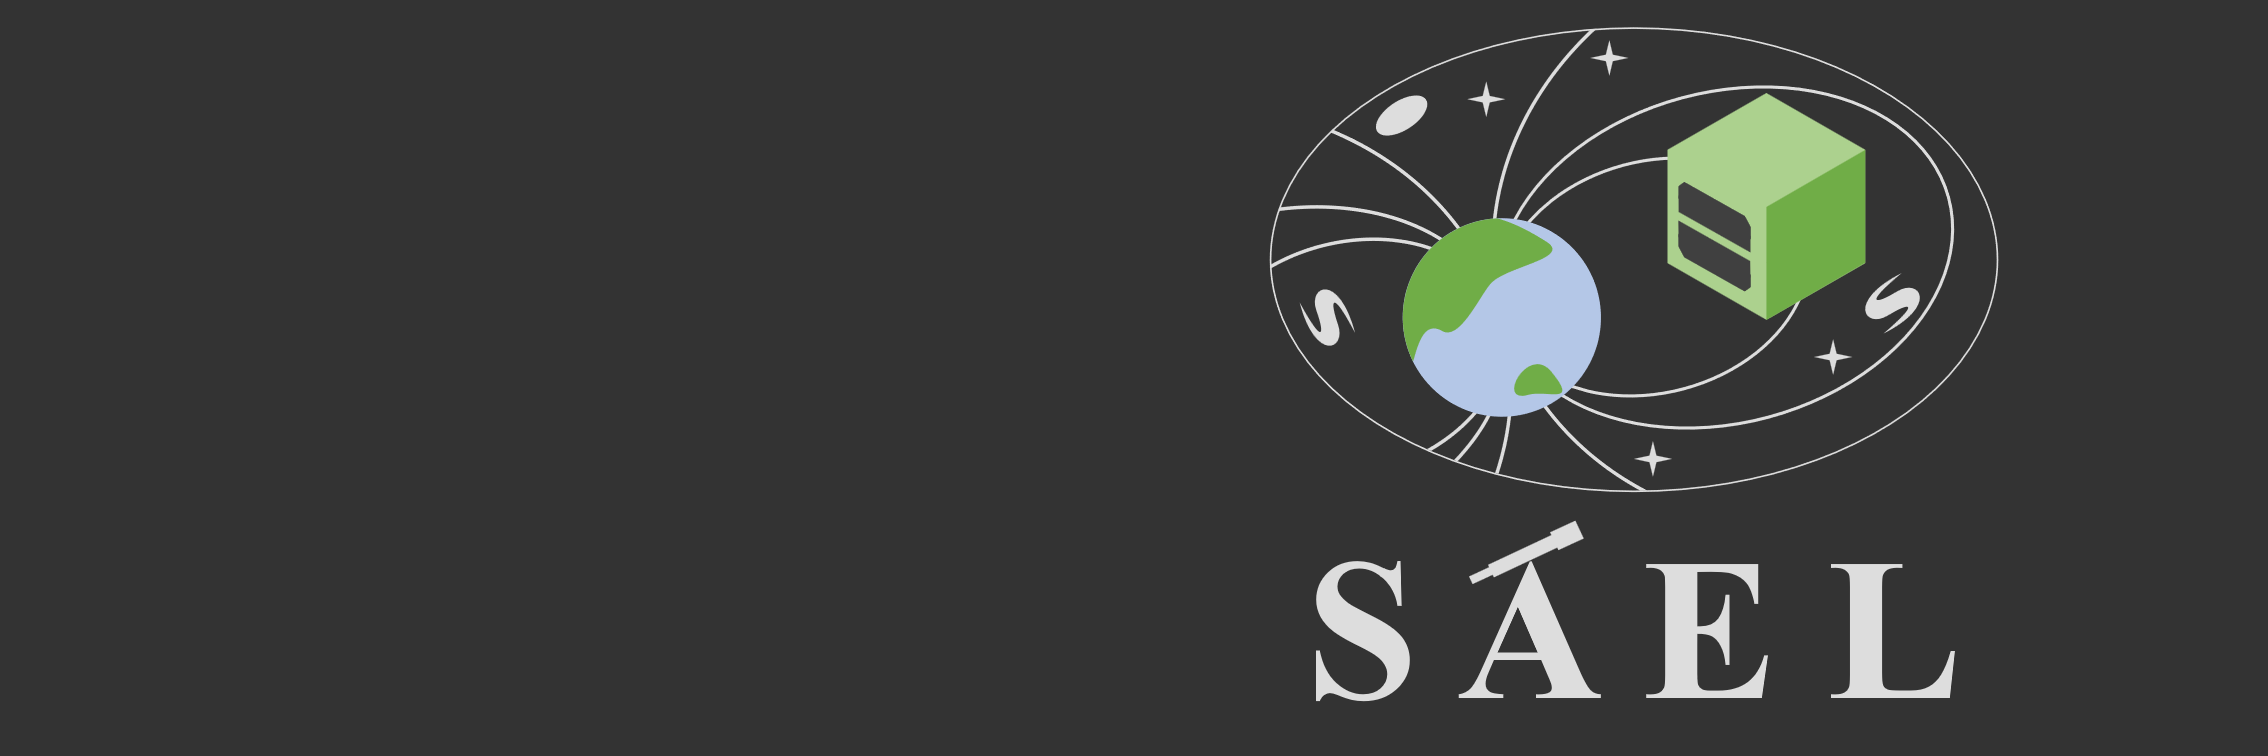 SAEL - Space science, Astronomy and Engineering Laboratory -